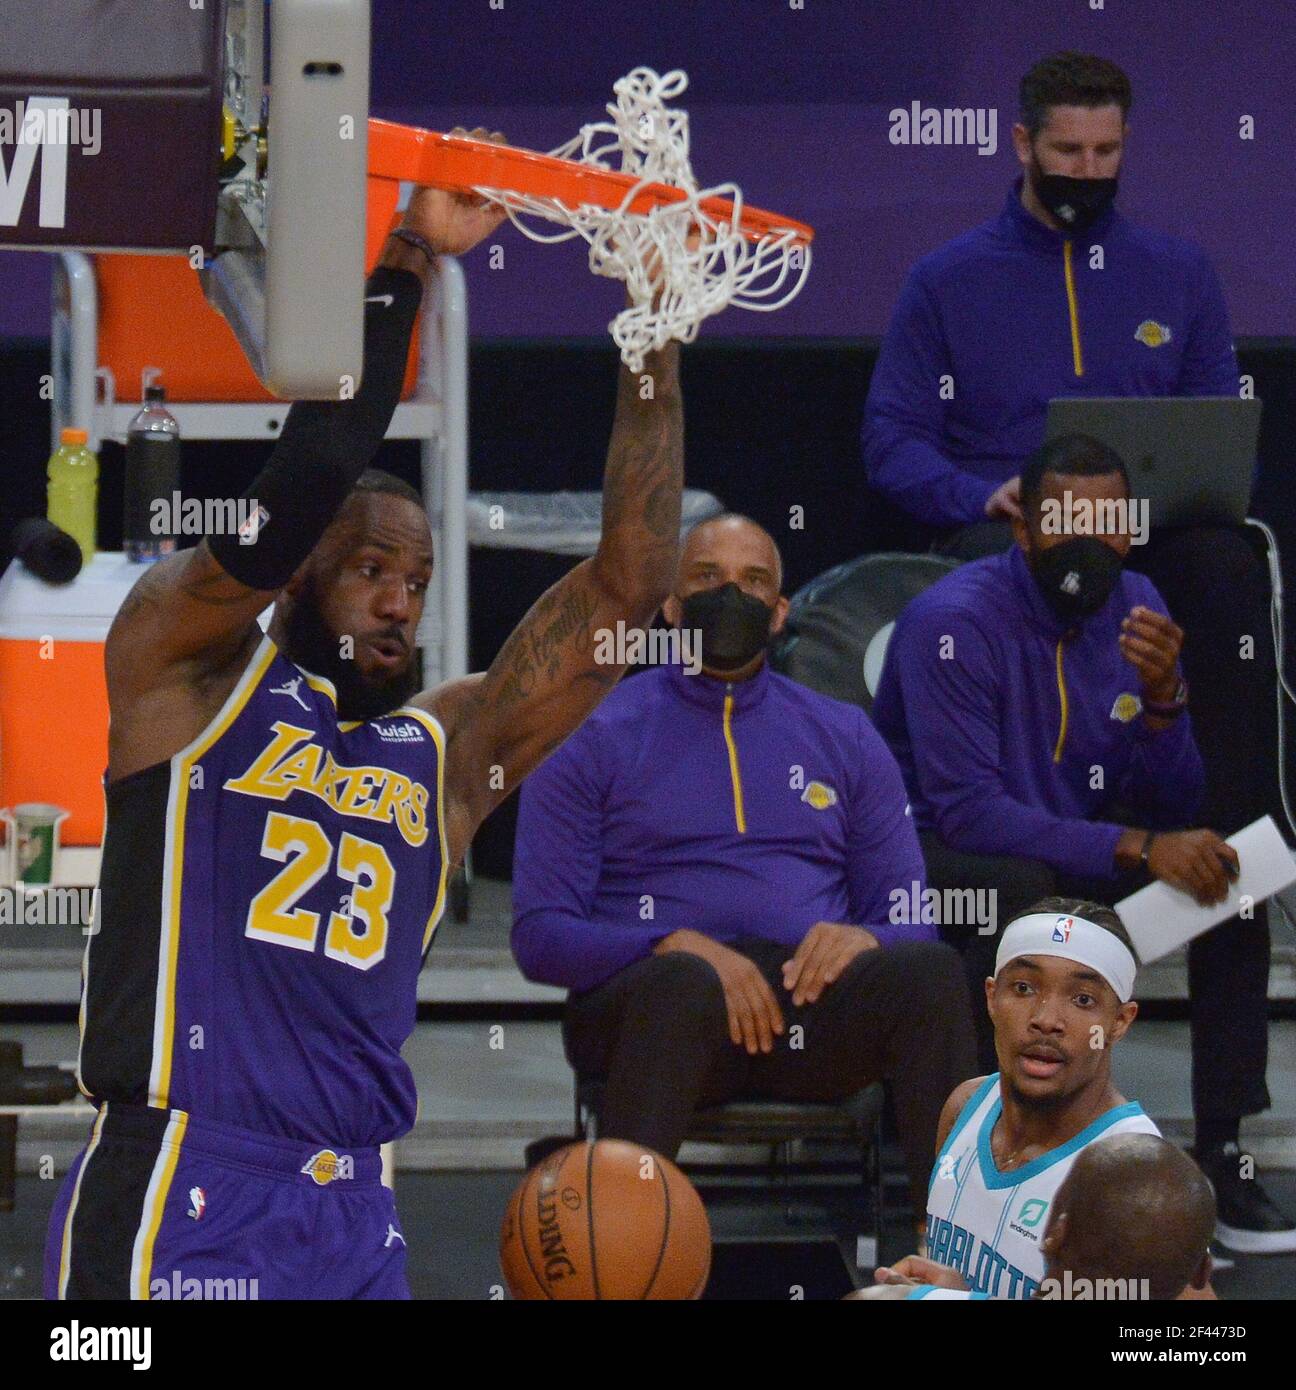 Los Angeles, United States. 18th Mar, 2021. Los Angeles Lakers' forward LeBron James jams for two of his 37-points on Charlotte Hornets' guard Devonte Graham during the first half at Staples Center in Los Angeles on Thursday, March 18, 2021. The Lakers defeated the Hornets 116-105. Photo by Jim Ruymen/UPI Credit: UPI/Alamy Live News Credit: UPI/Alamy Live News Stock Photo